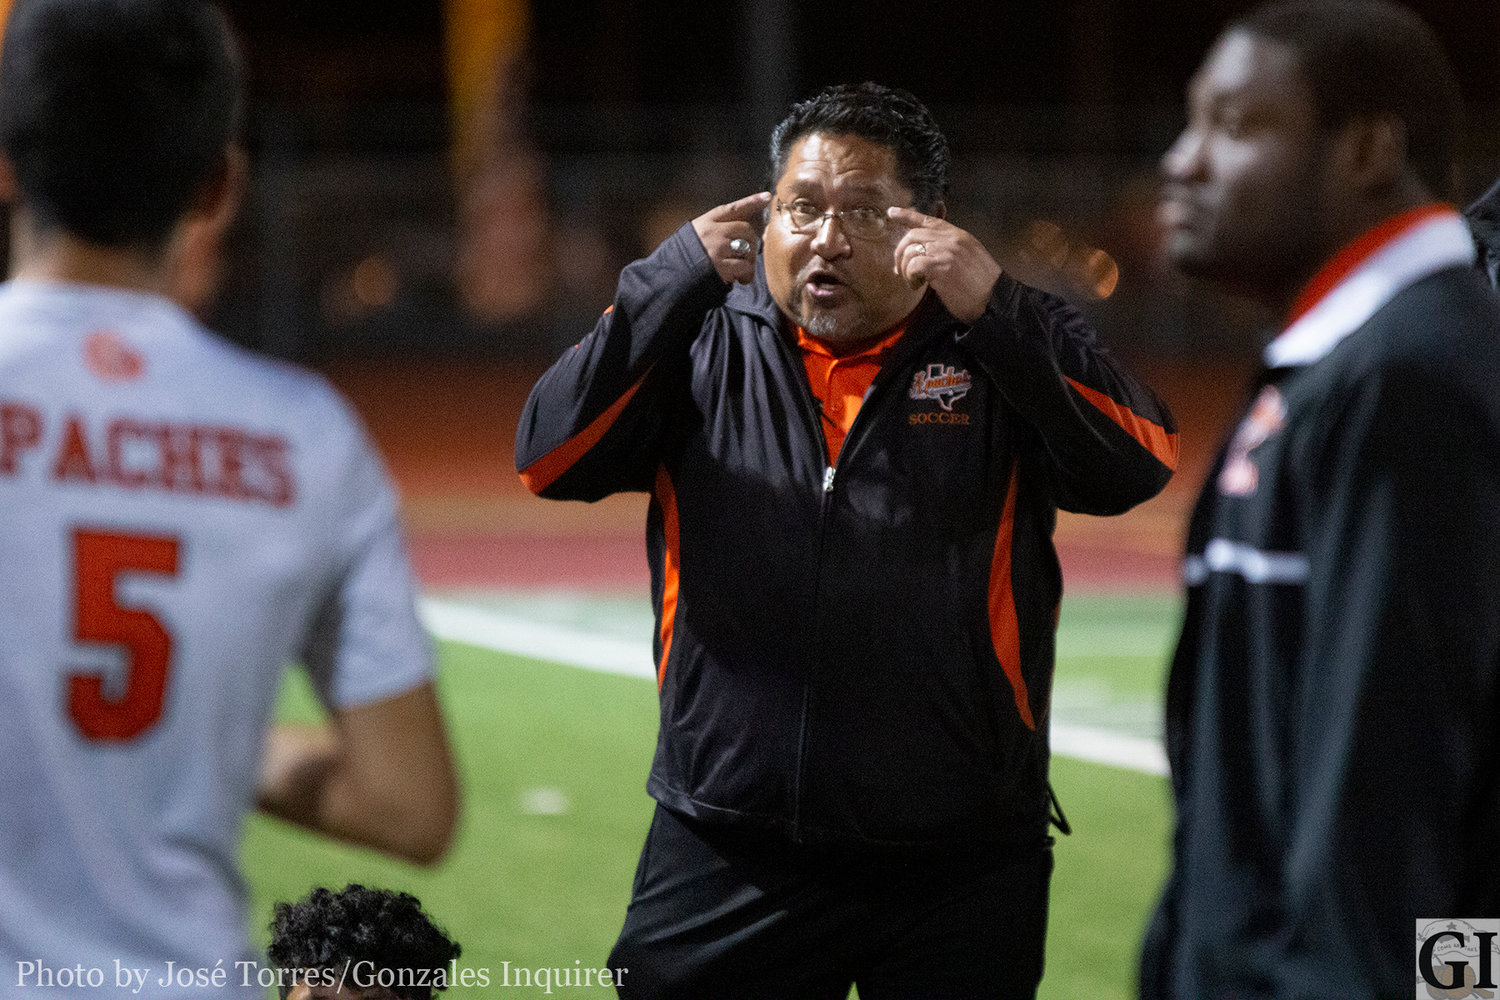 Head coach Greg Ramirez and his Gonzales Apaches soccer team is back in the regional tournament. This will be the team’s second trip to McAllen, first since the 2015-16 season in Gonzales’ five seasons of existence.